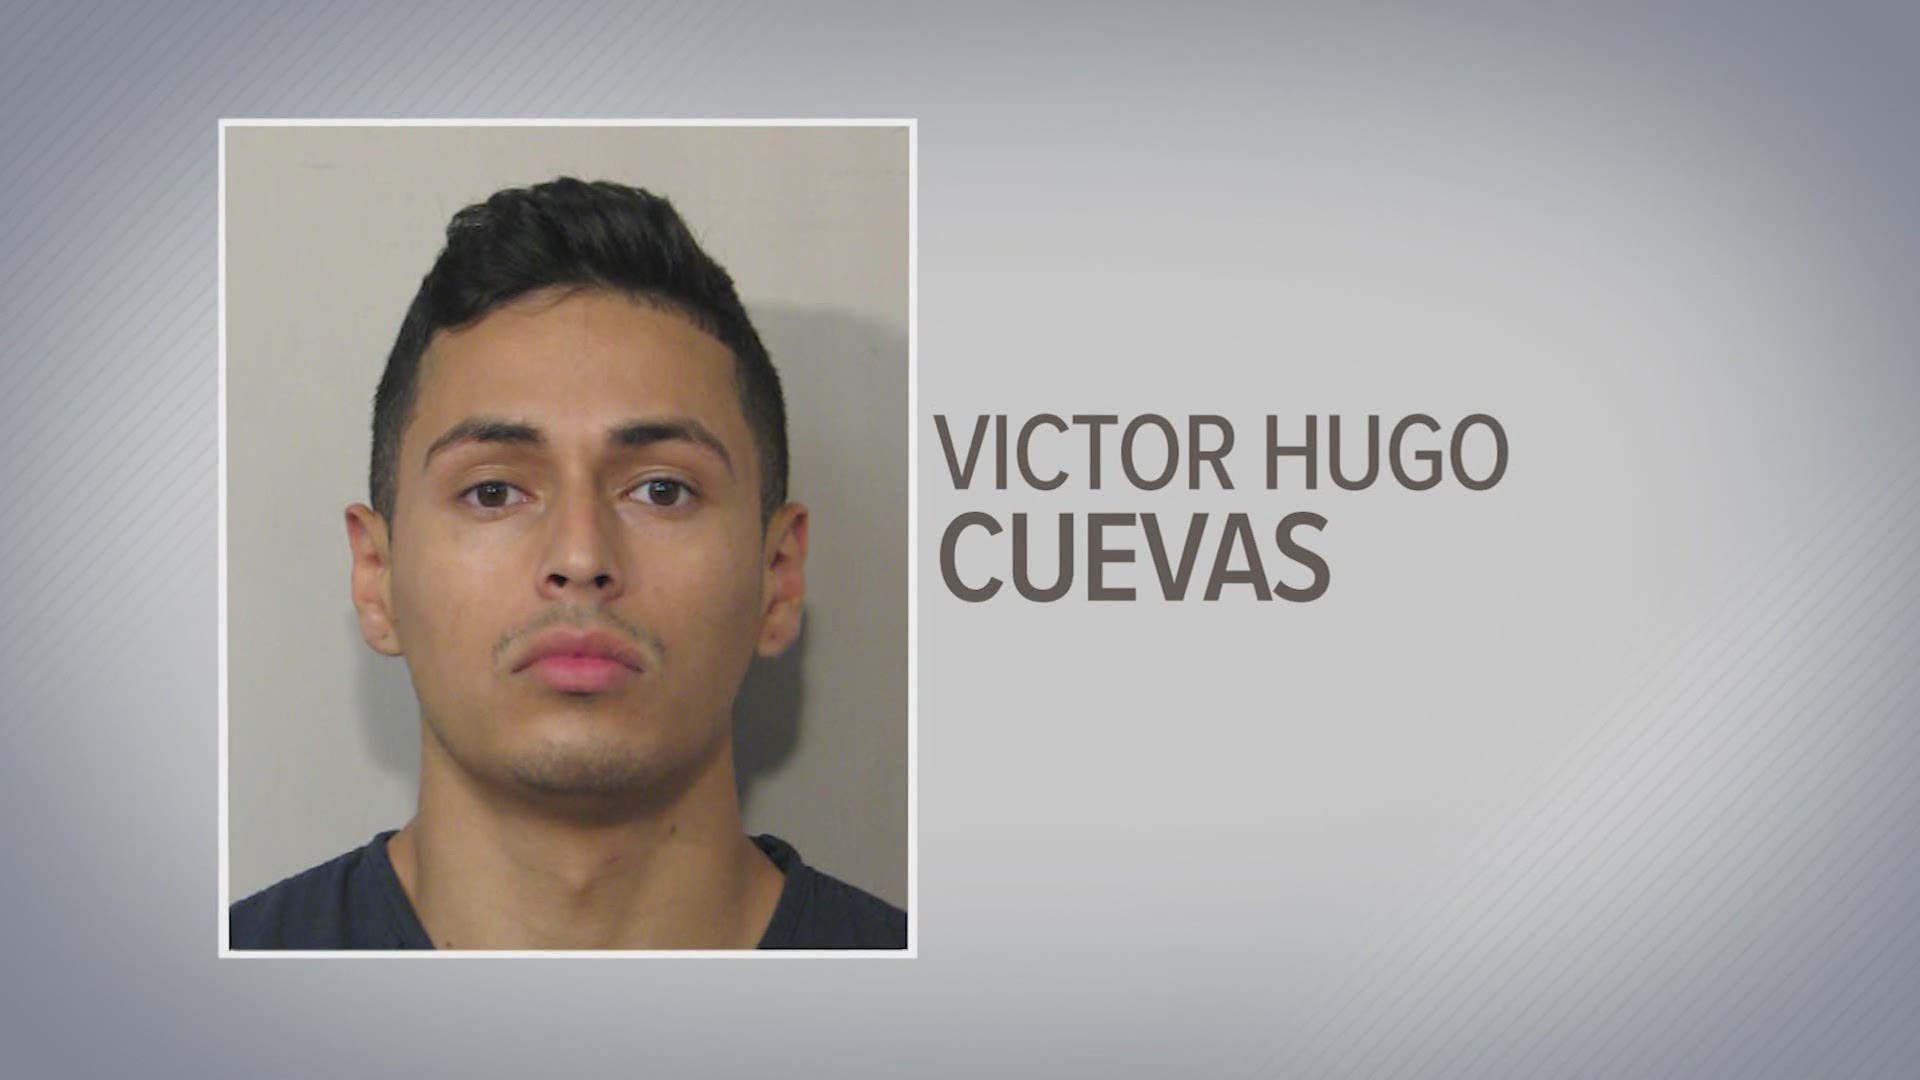 Victor Hugo Cuevas has been arrested and is in the process of being booked into the Fort Bend County jail.